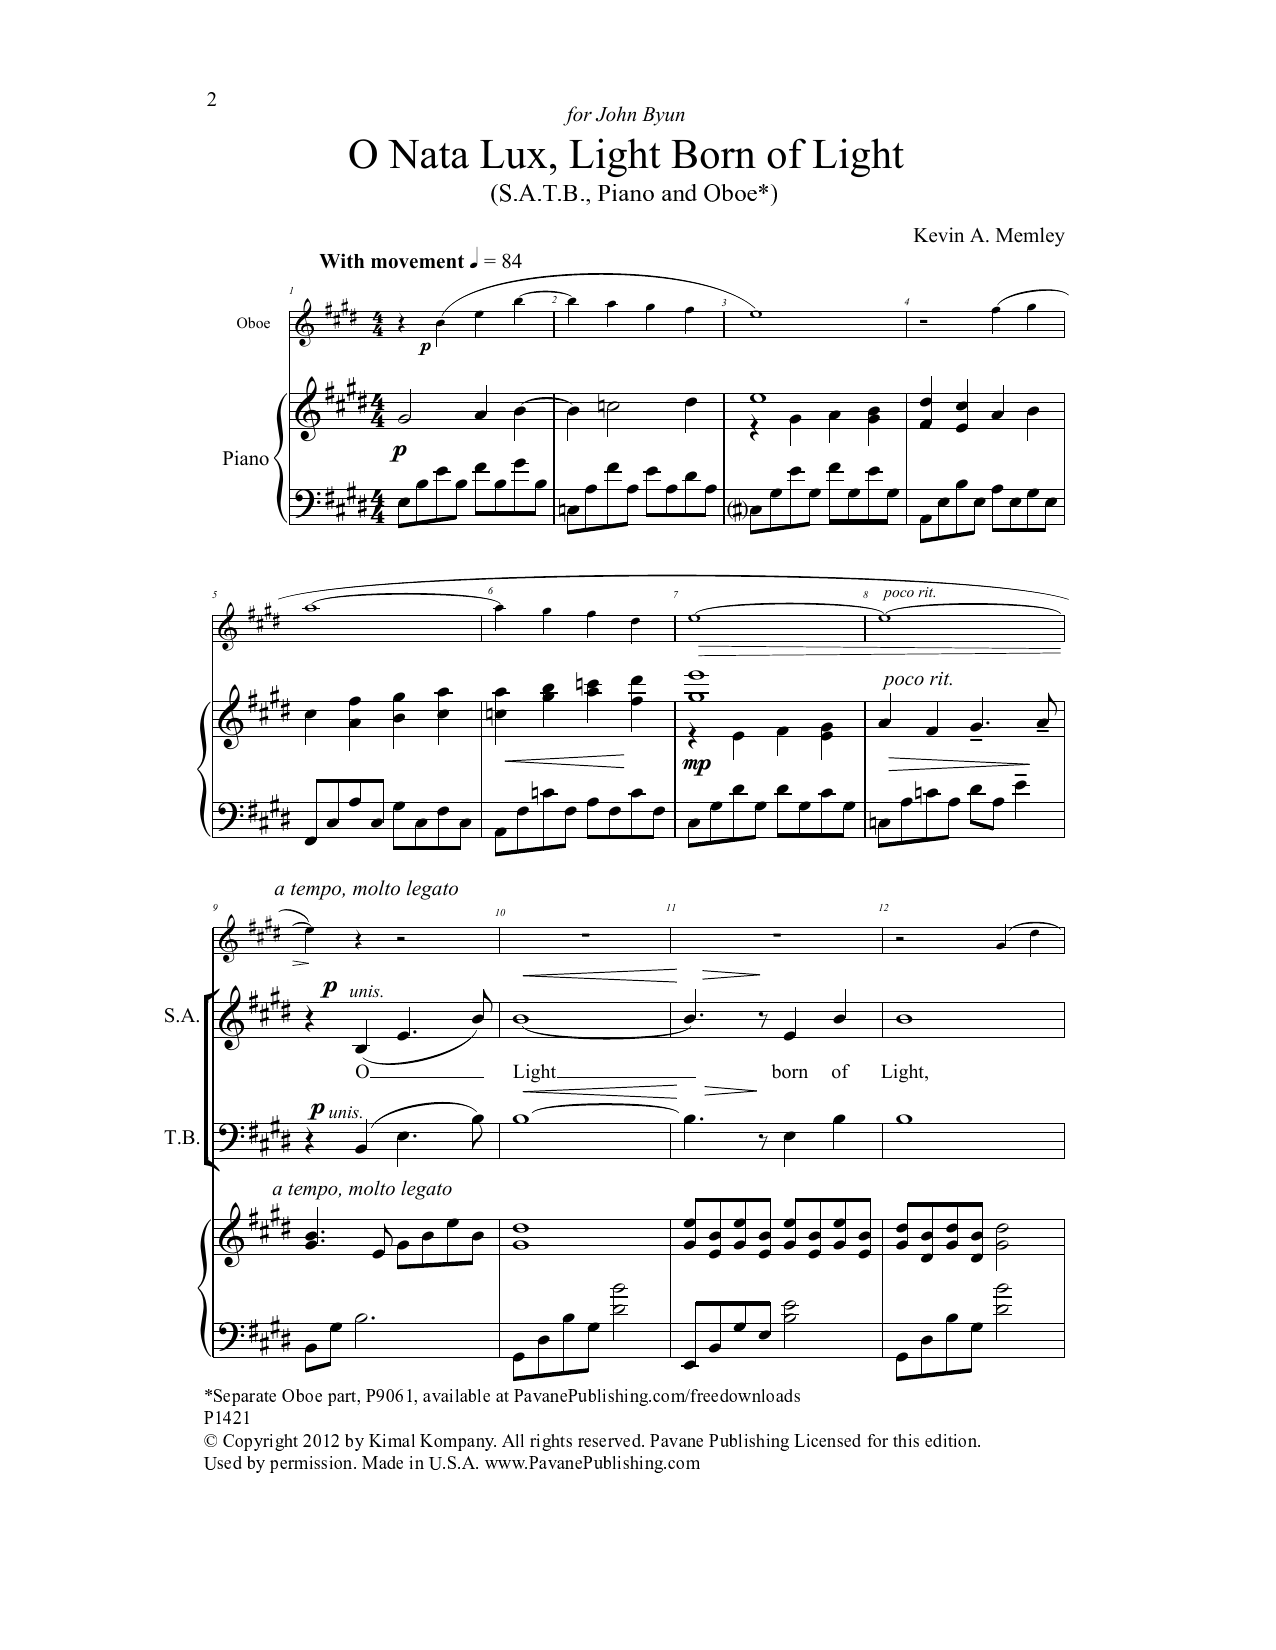 Download Kevin A. Memley O Nata Lux, Born of Light Sheet Music